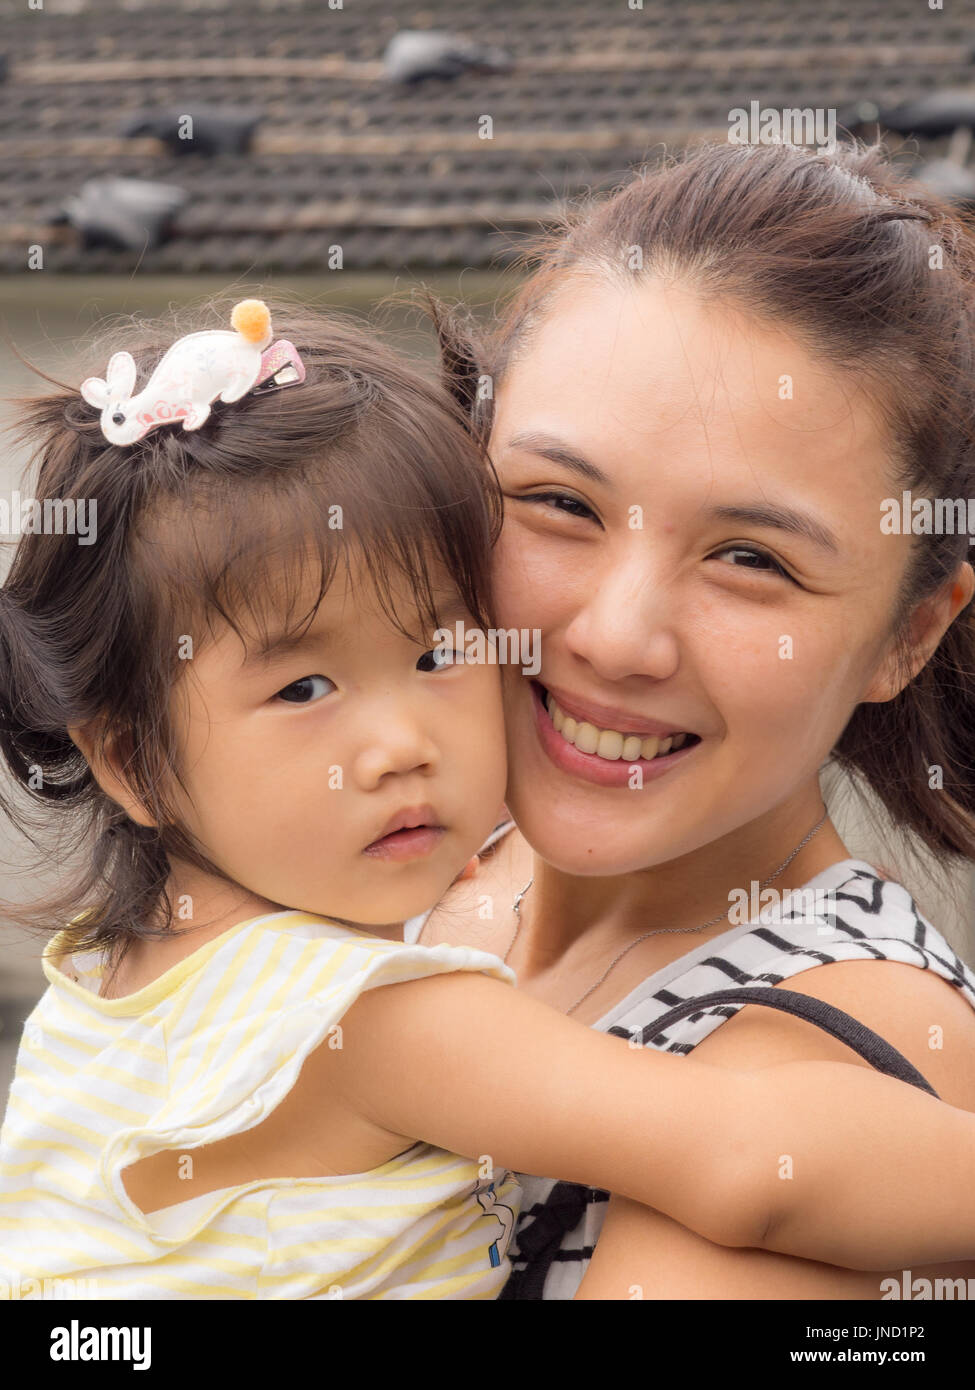 Yilan, Taiwan - October 14, 2016: Portrait of the Taiwanese girl and woman Stock Photo